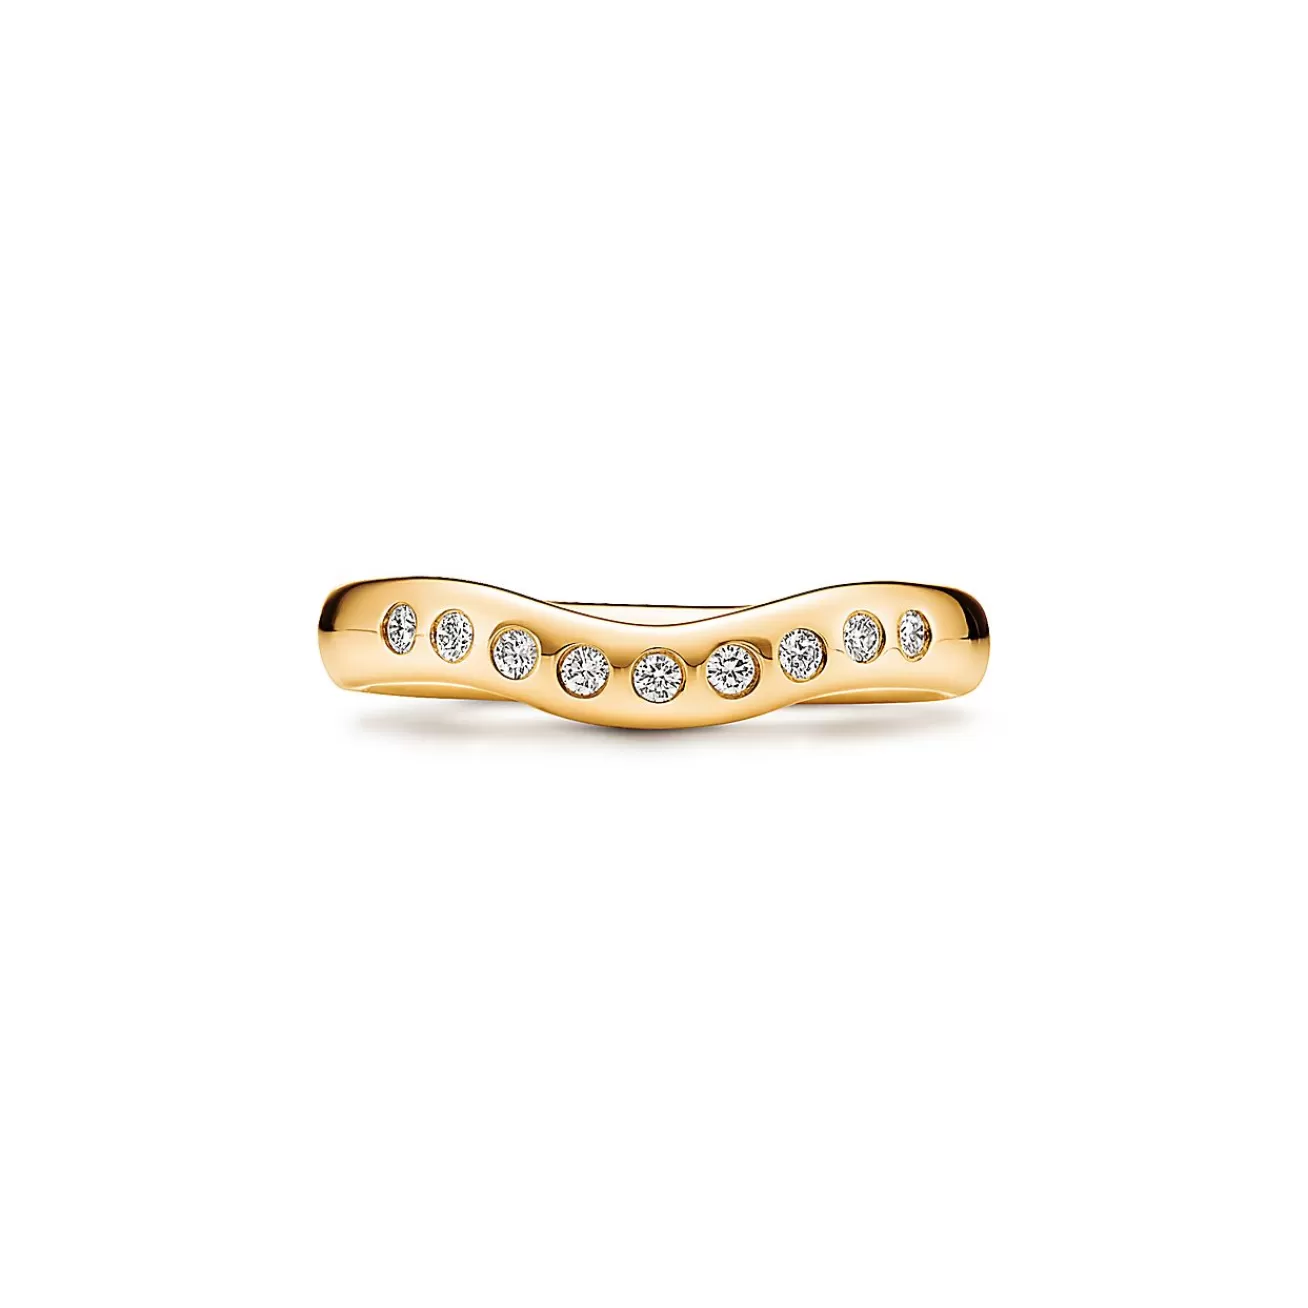 Tiffany & Co. Elsa Peretti® wedding band ring with diamonds in 18k gold. | ^ Rings | Gold Jewelry